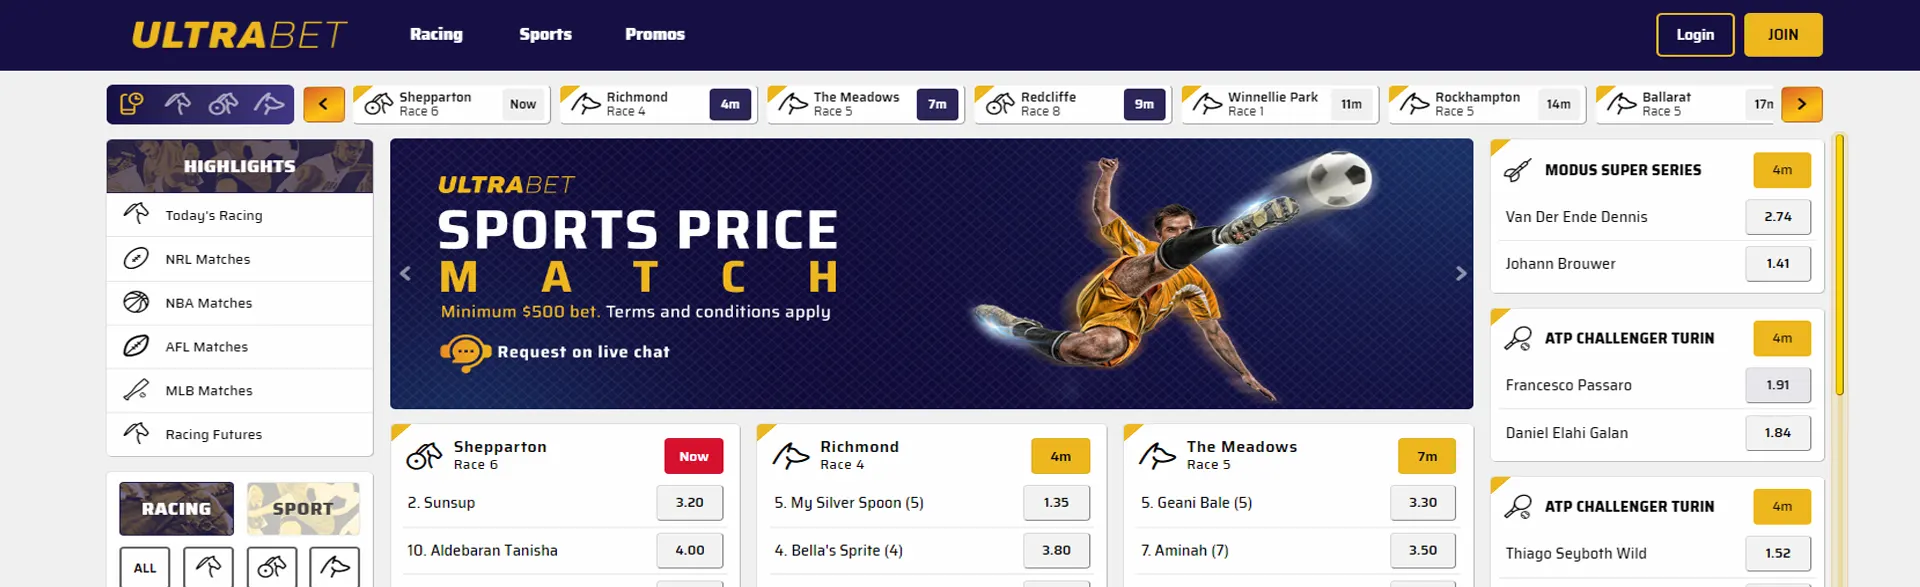 Ultrabet Australia page featuring sports price match and betting highlights odds.